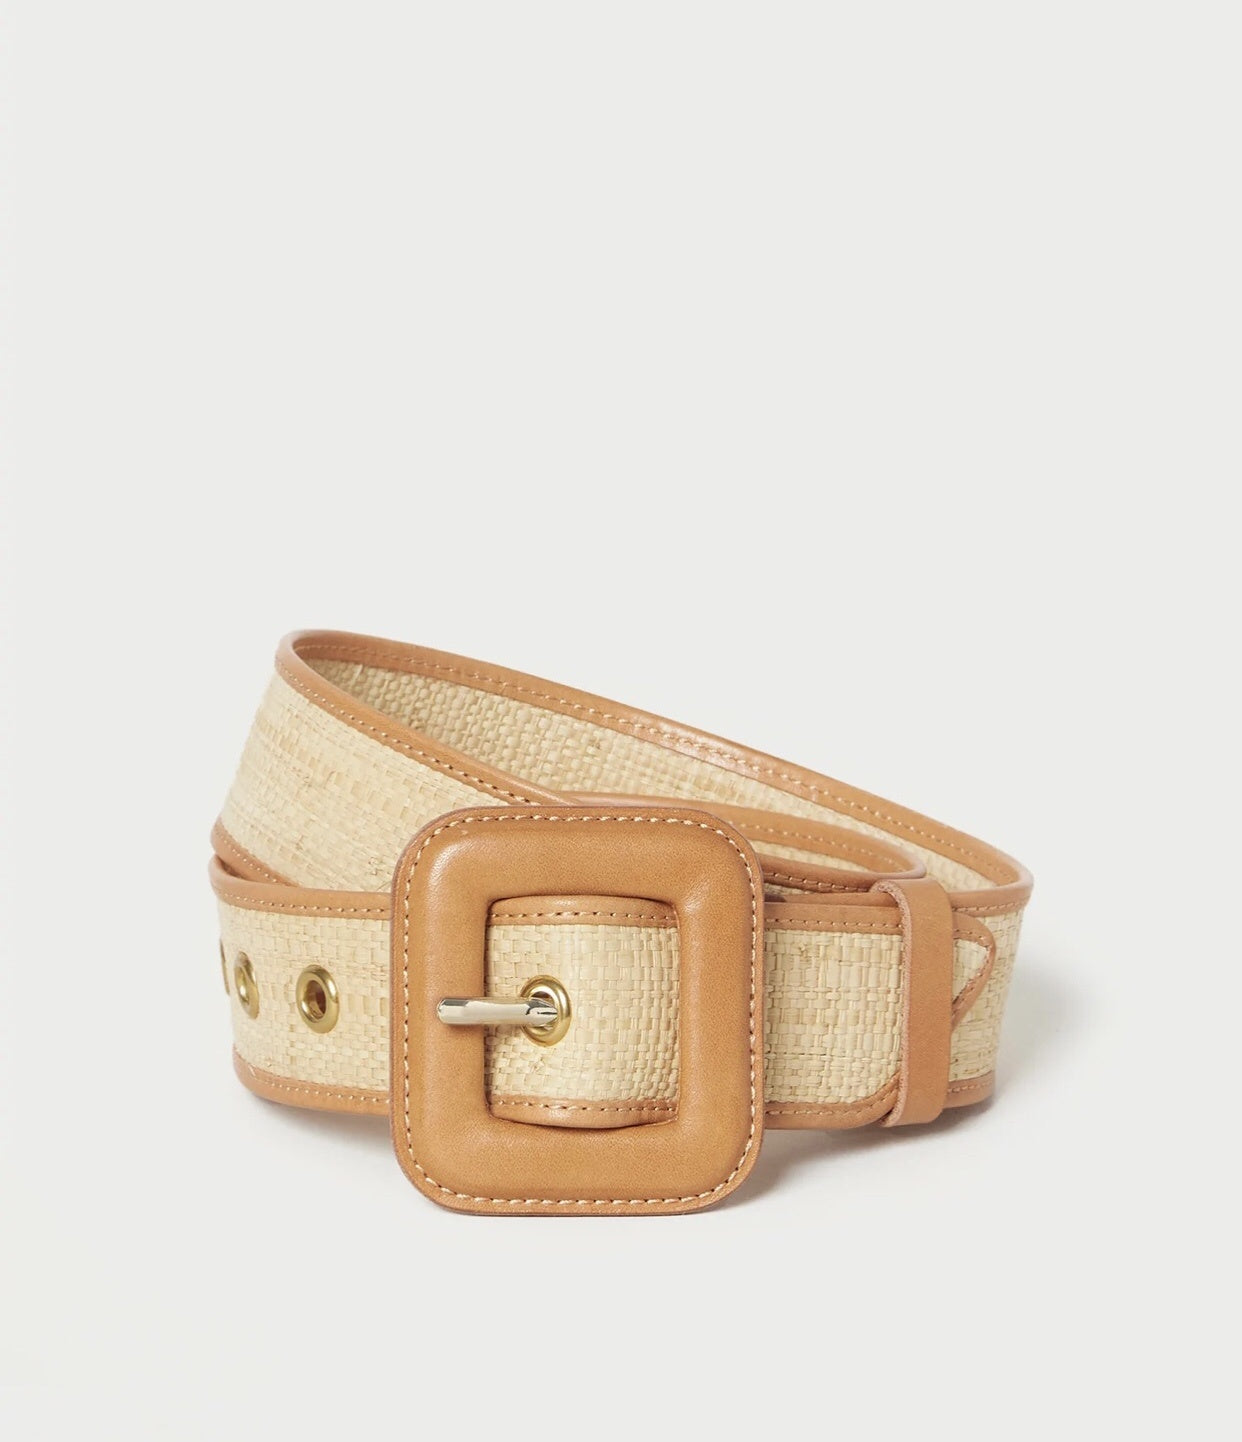 Two Tone Belt w/ Leather Buckle - Natural